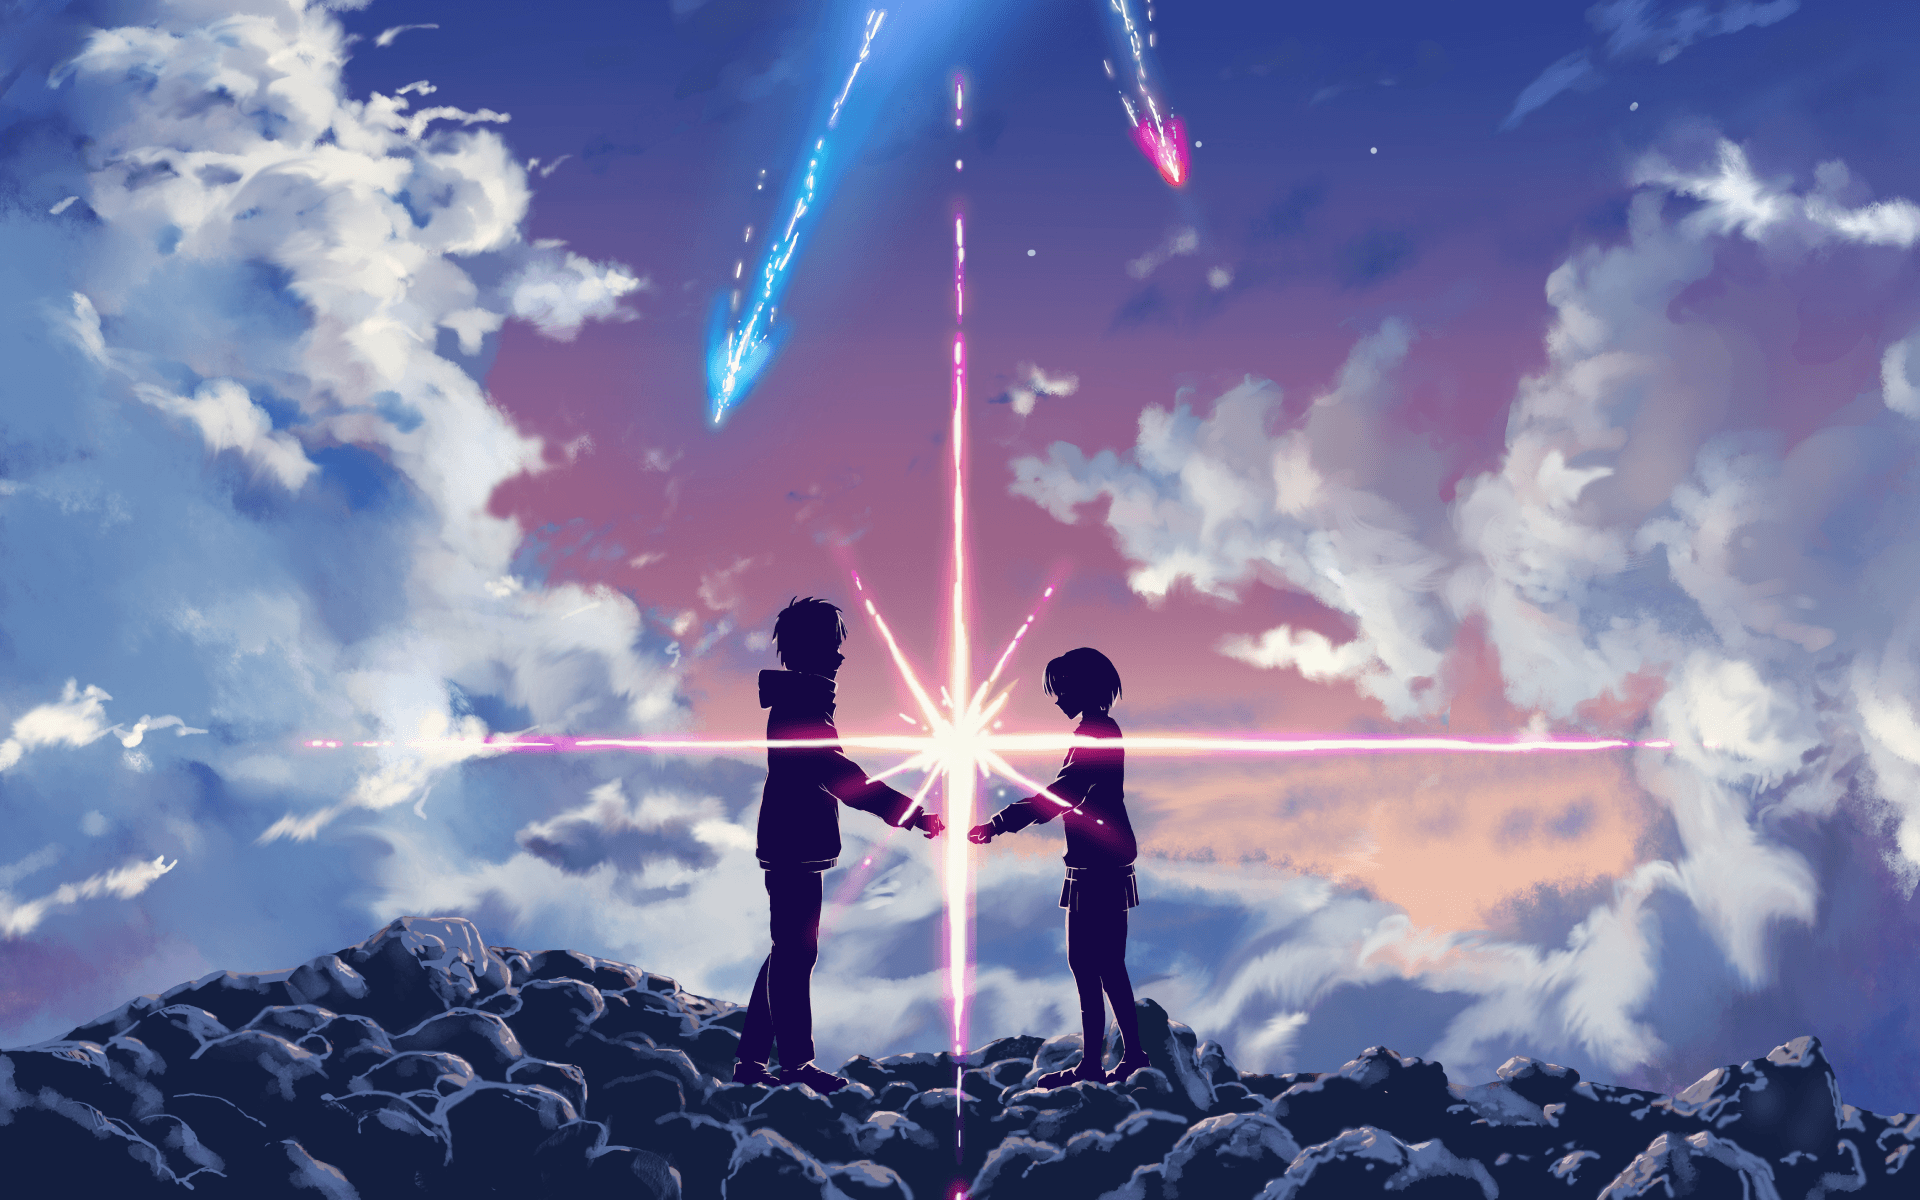 Your Name Anime HD Wallpaper Free Your Name Anime HD Background